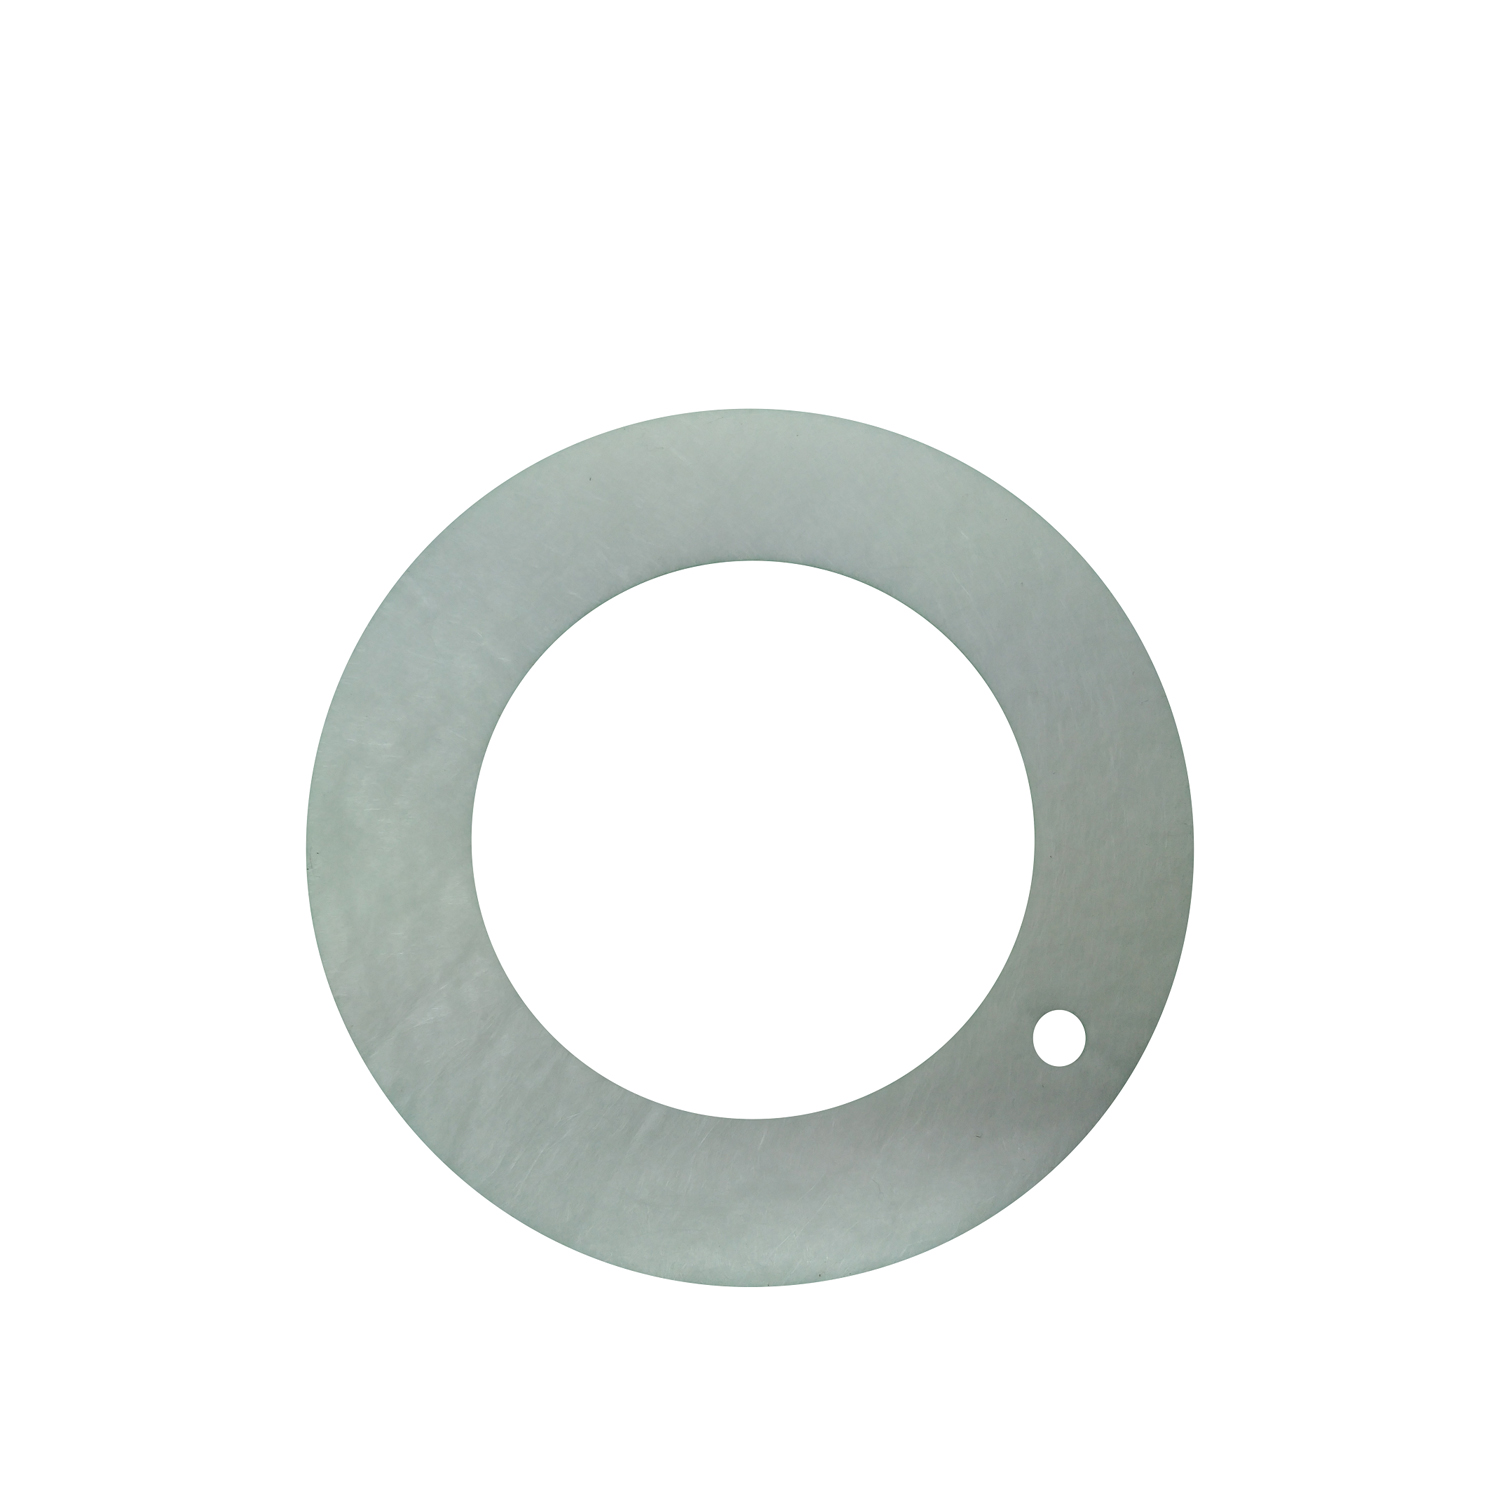 Chimney Flue Pipe Gasket for Traeger Pellet Grill-YAOAWE